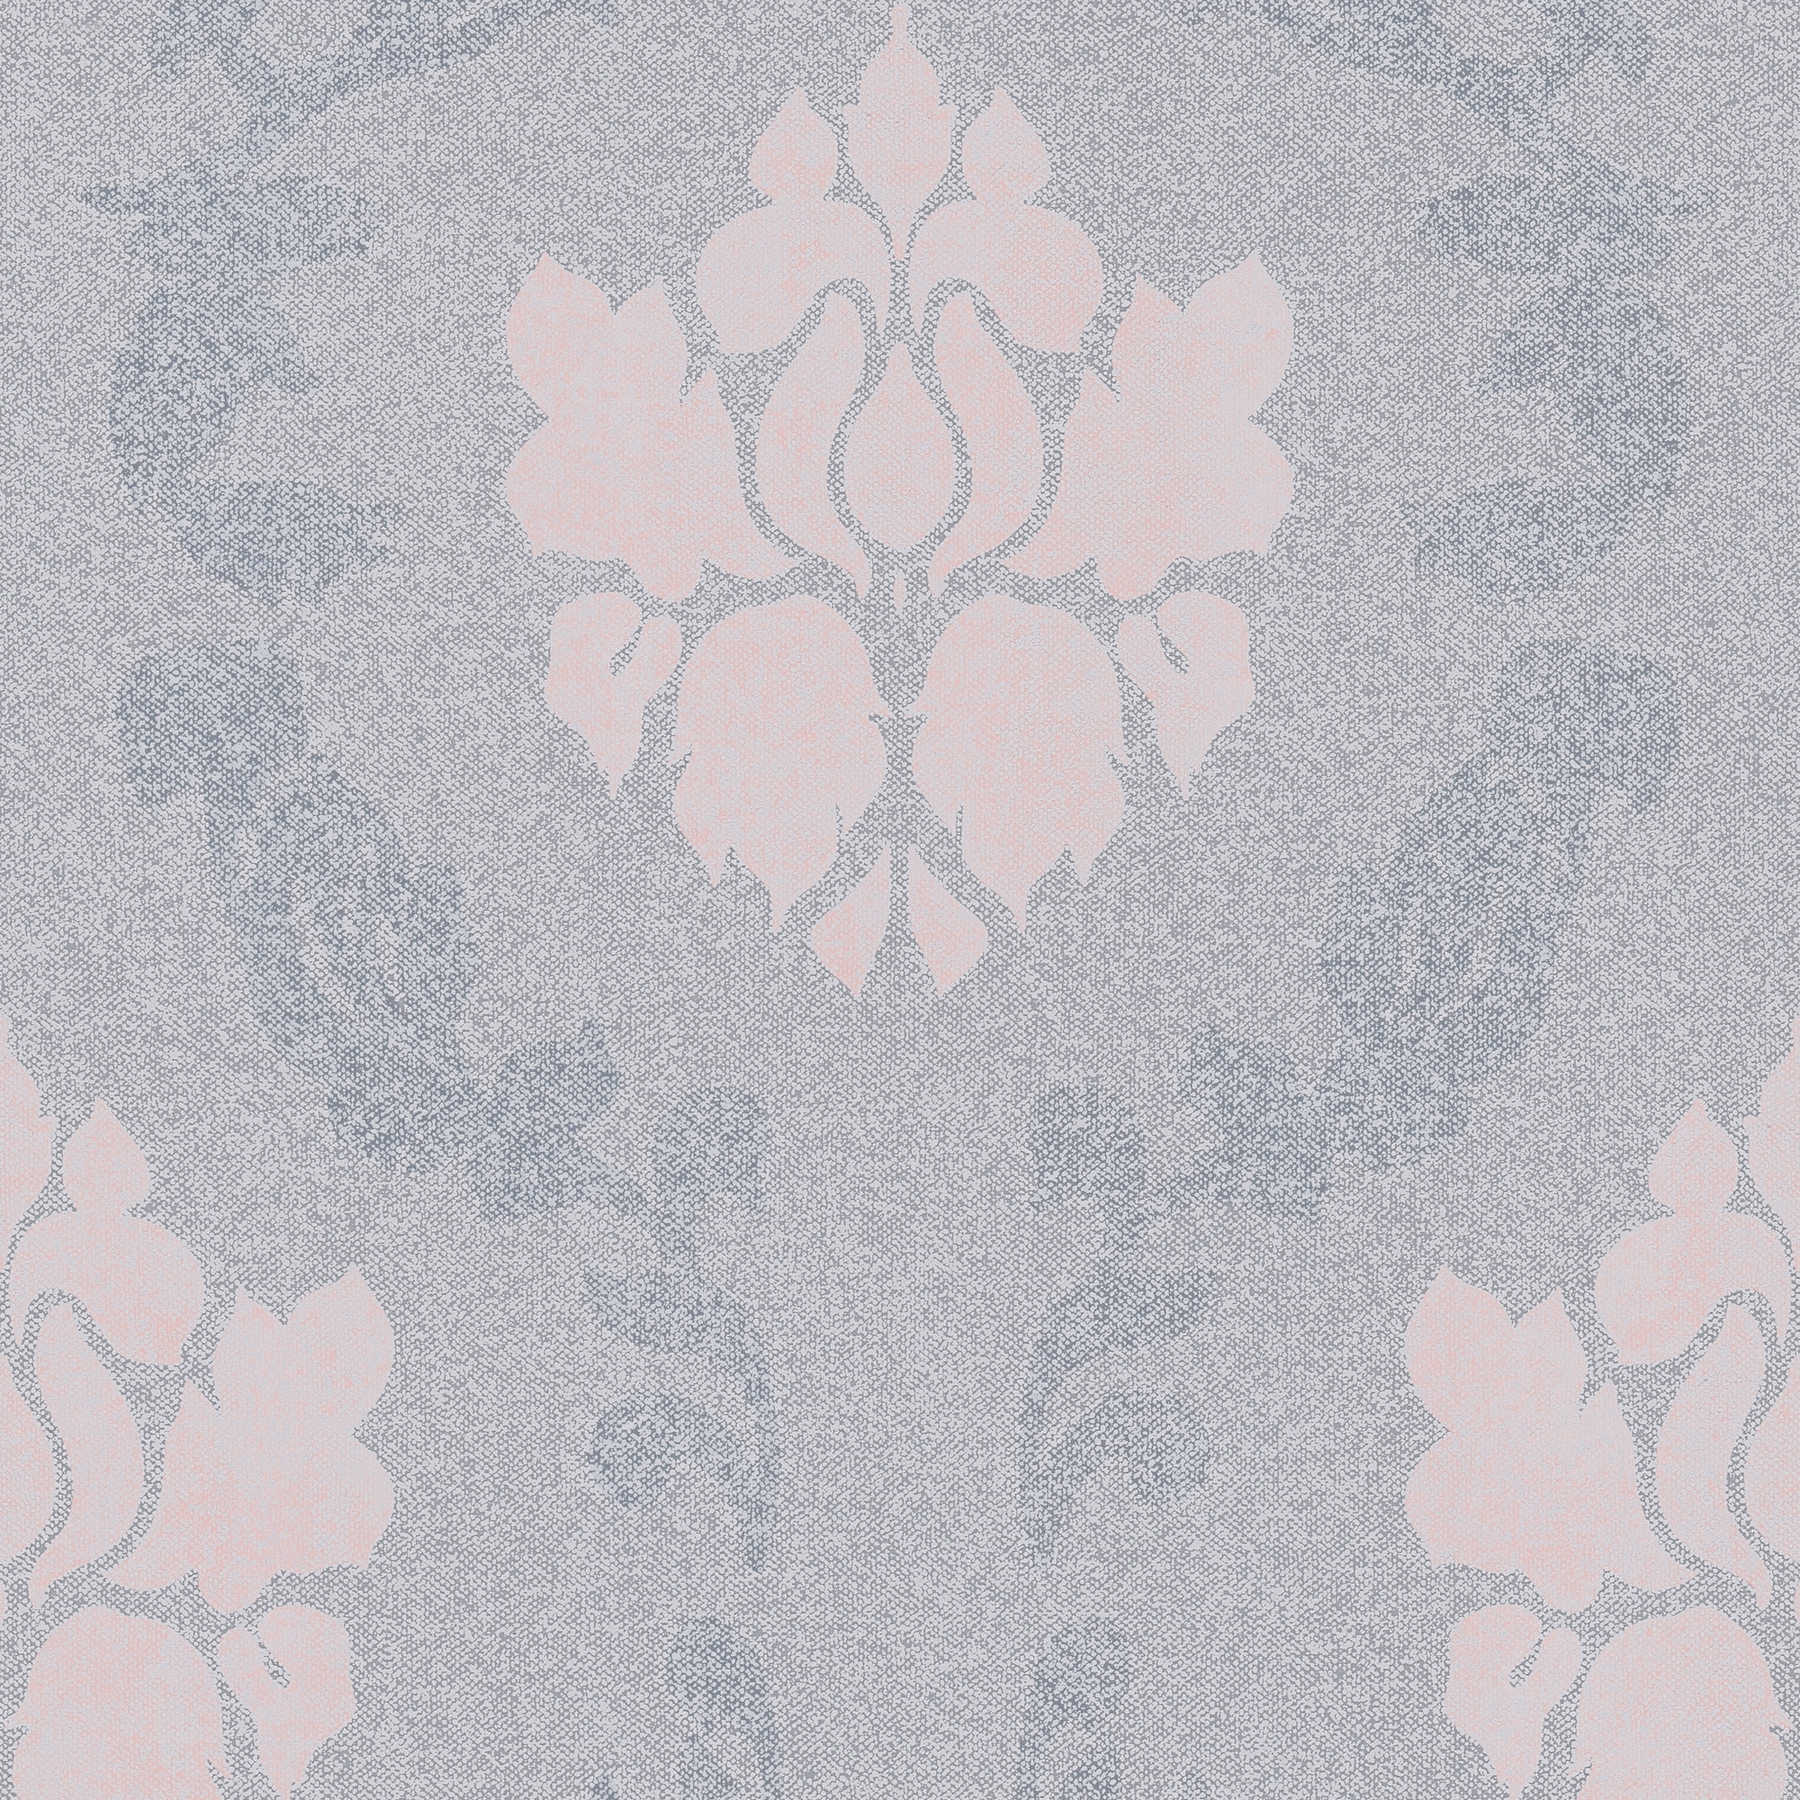         Ornament wallpaper with linen look - blue, pink
    